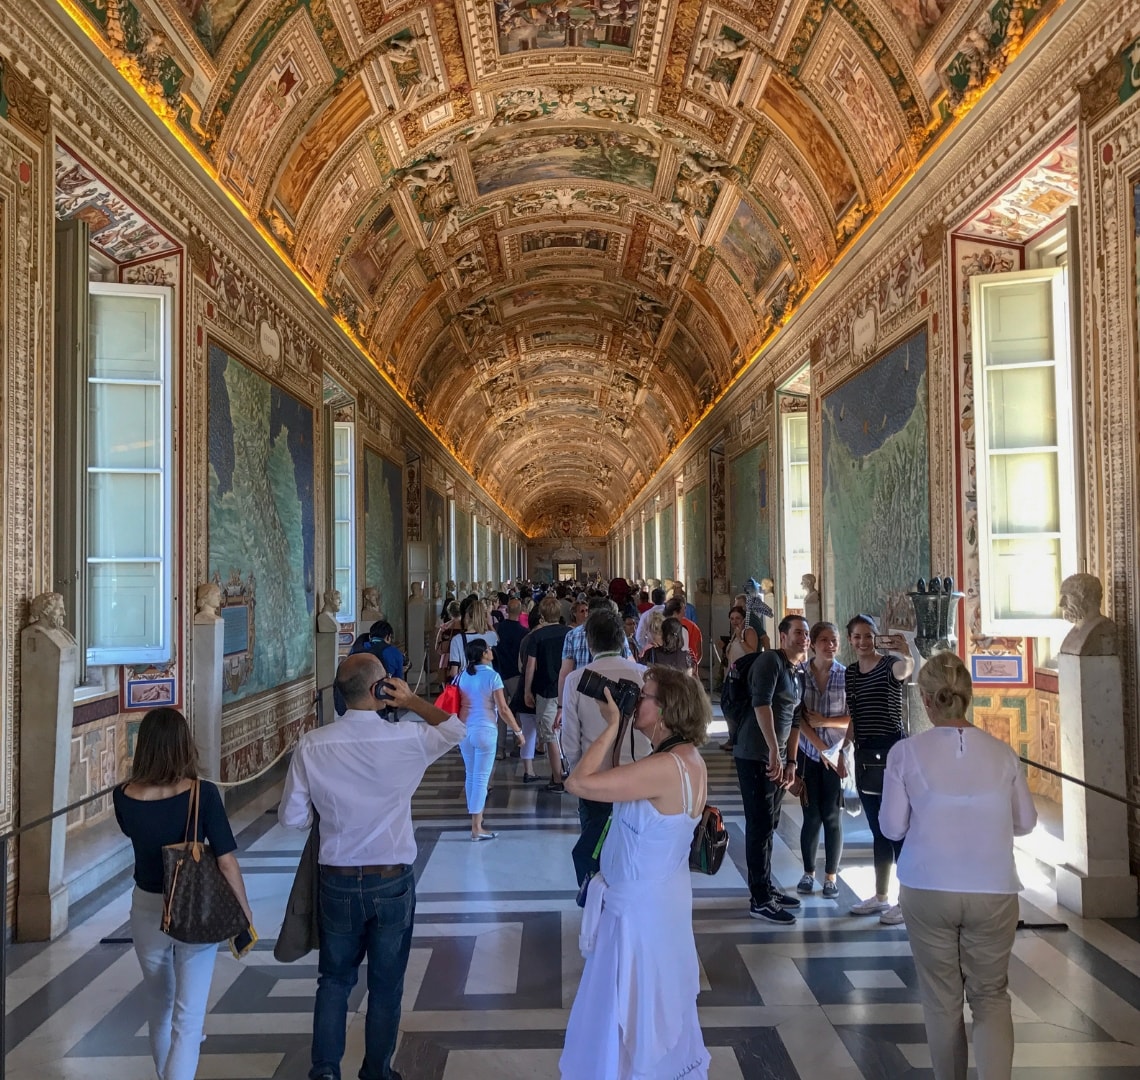 Rome - One of the corridors leading to the Sistine Chapel - it was beautiful but there were so many people!